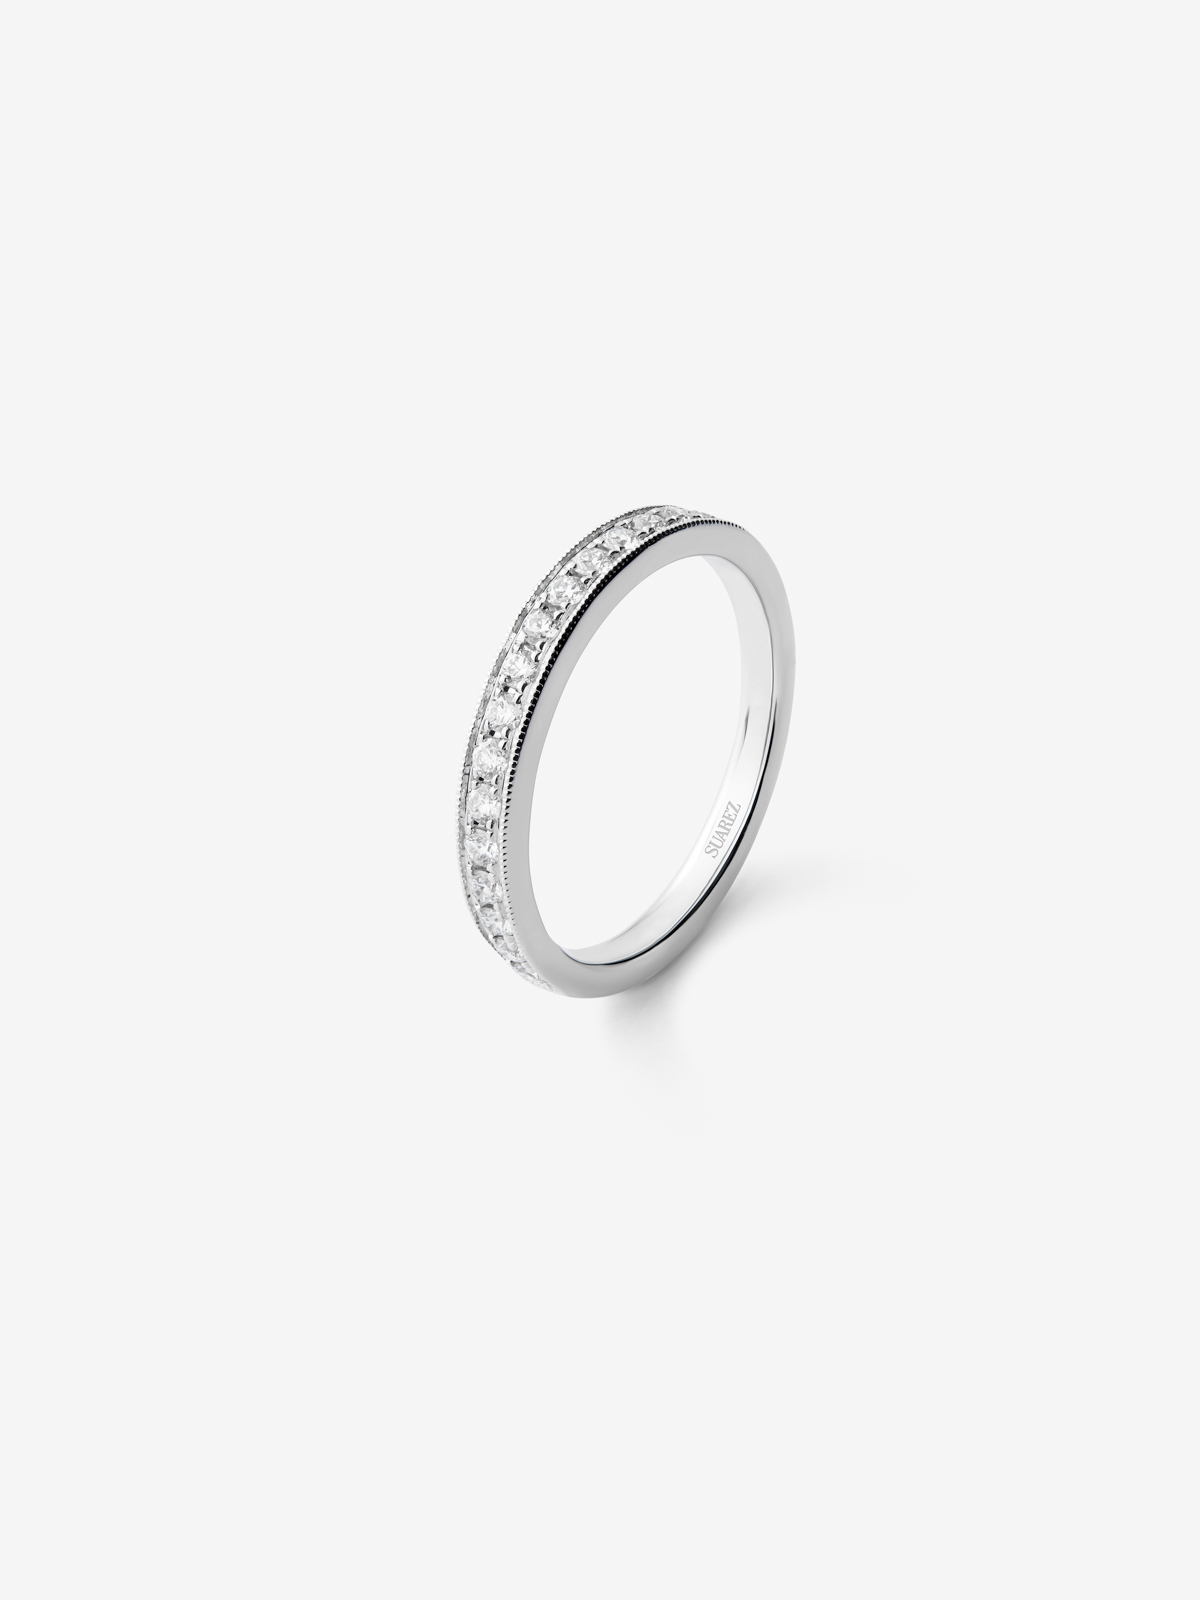 Half-eternity engagement ring of 18K white gold with diamonds on band 0.29ct.